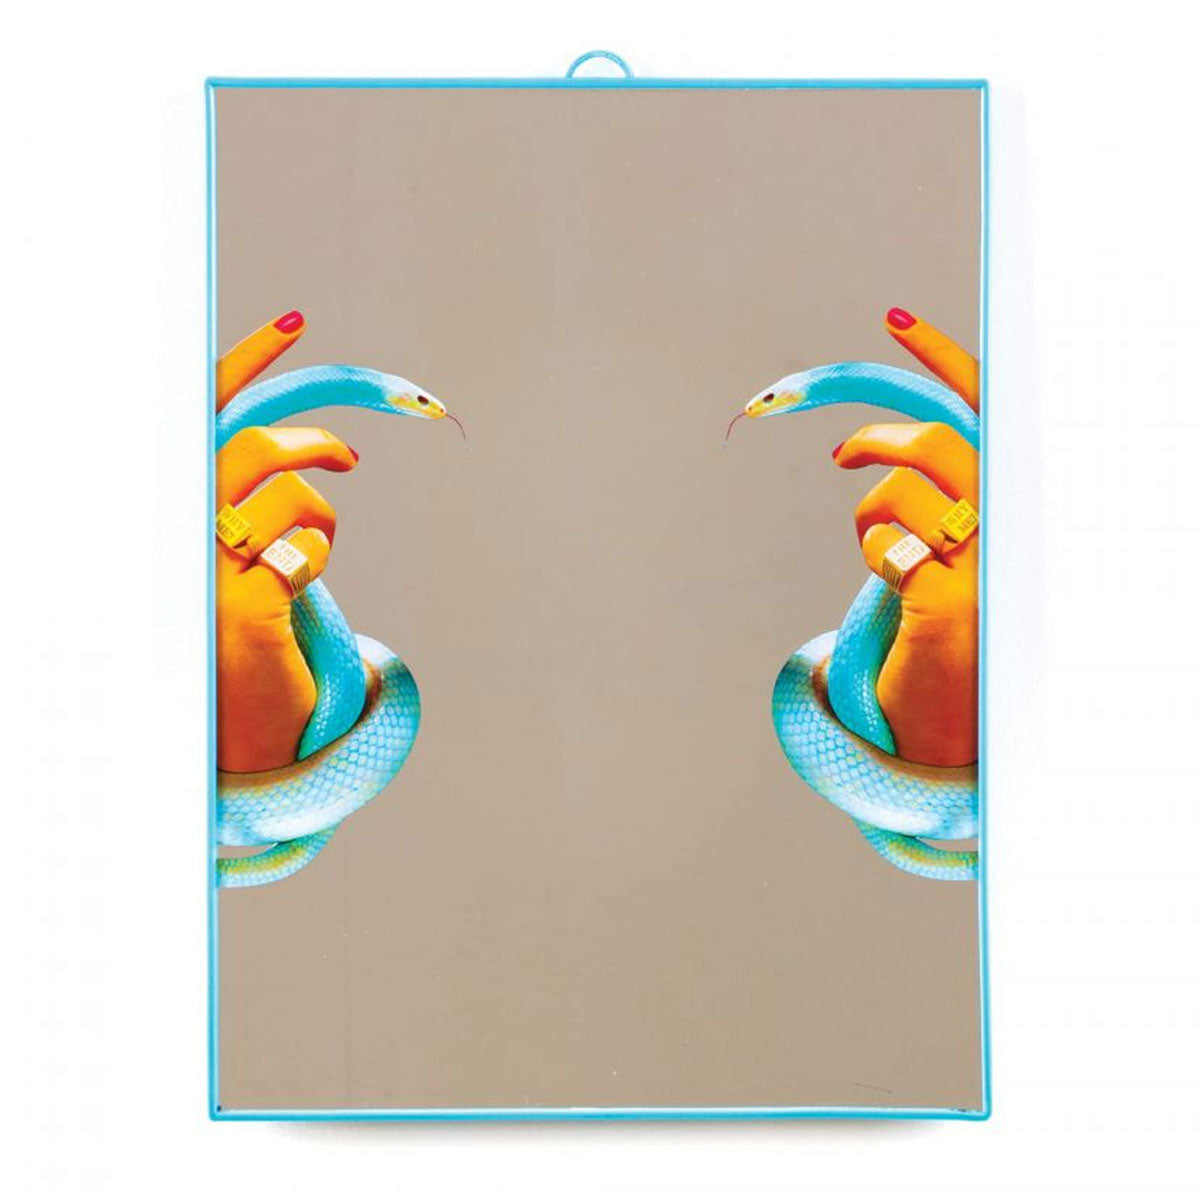 Seletti X Toiletpaper Hands with Snakes Mirror Large